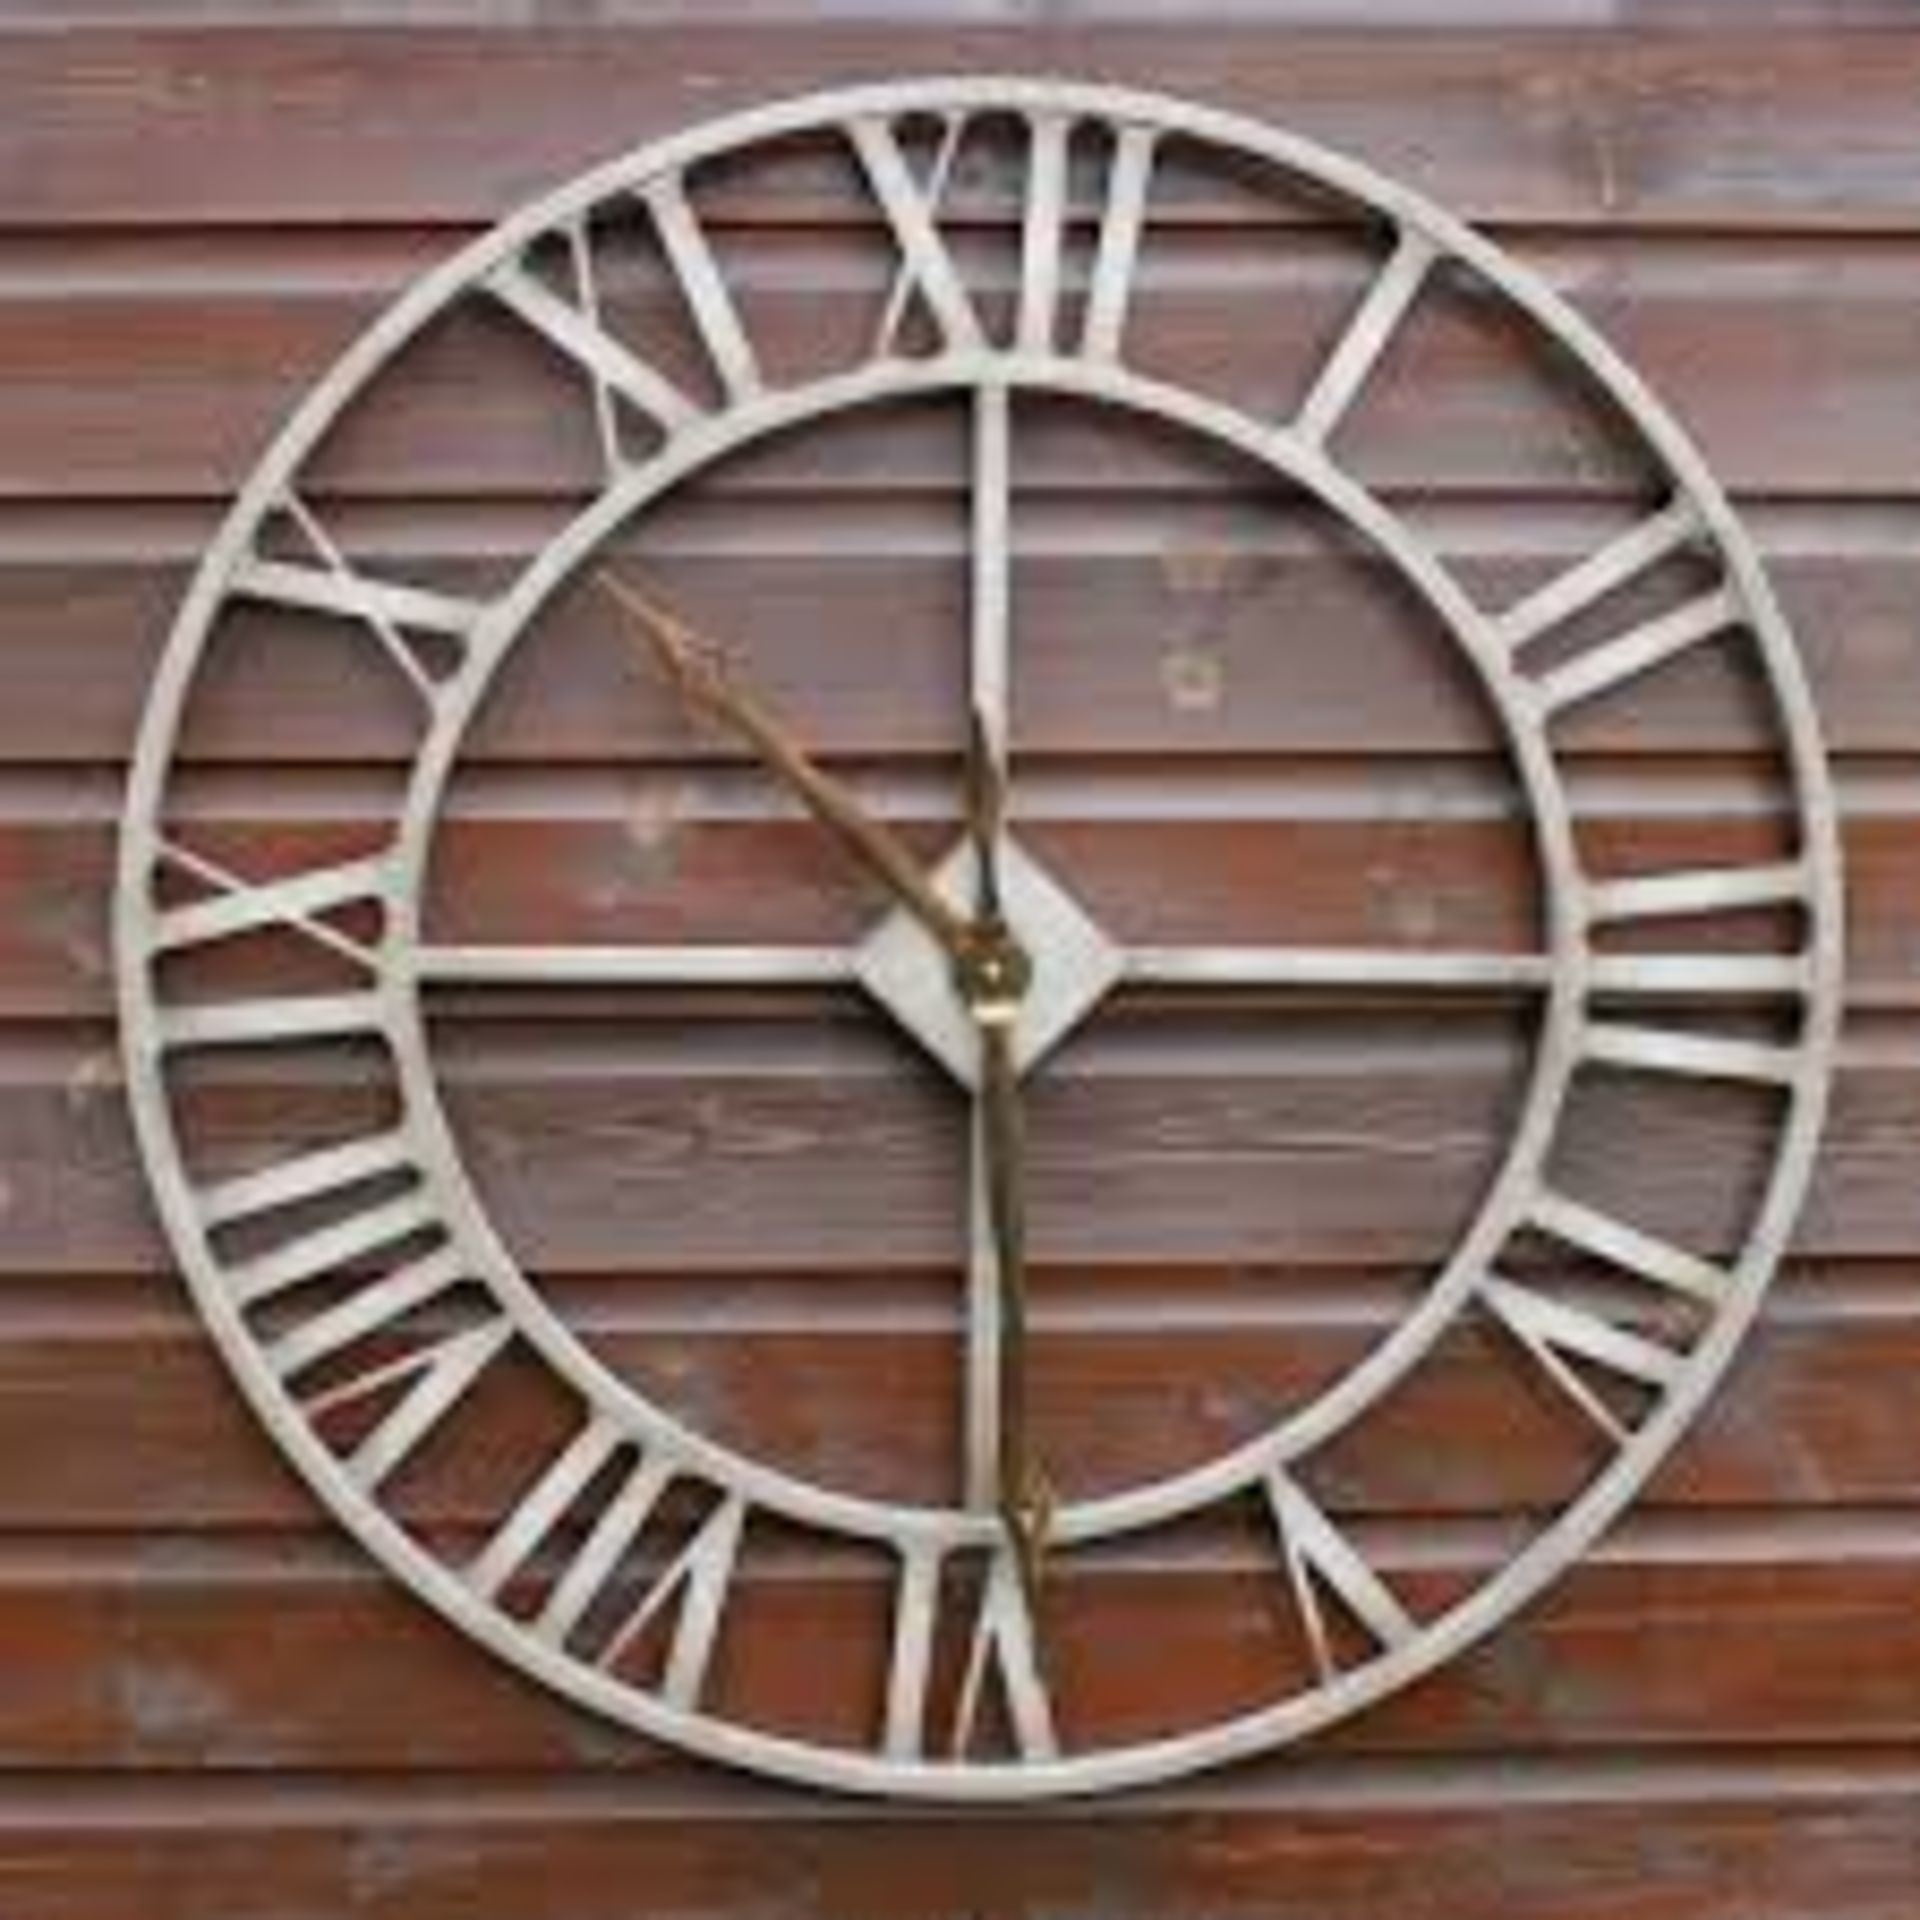 Boxed Rustic Jon art Design Large Clock RRP £18 (16904) (Public Viewings And Appraisals Available)